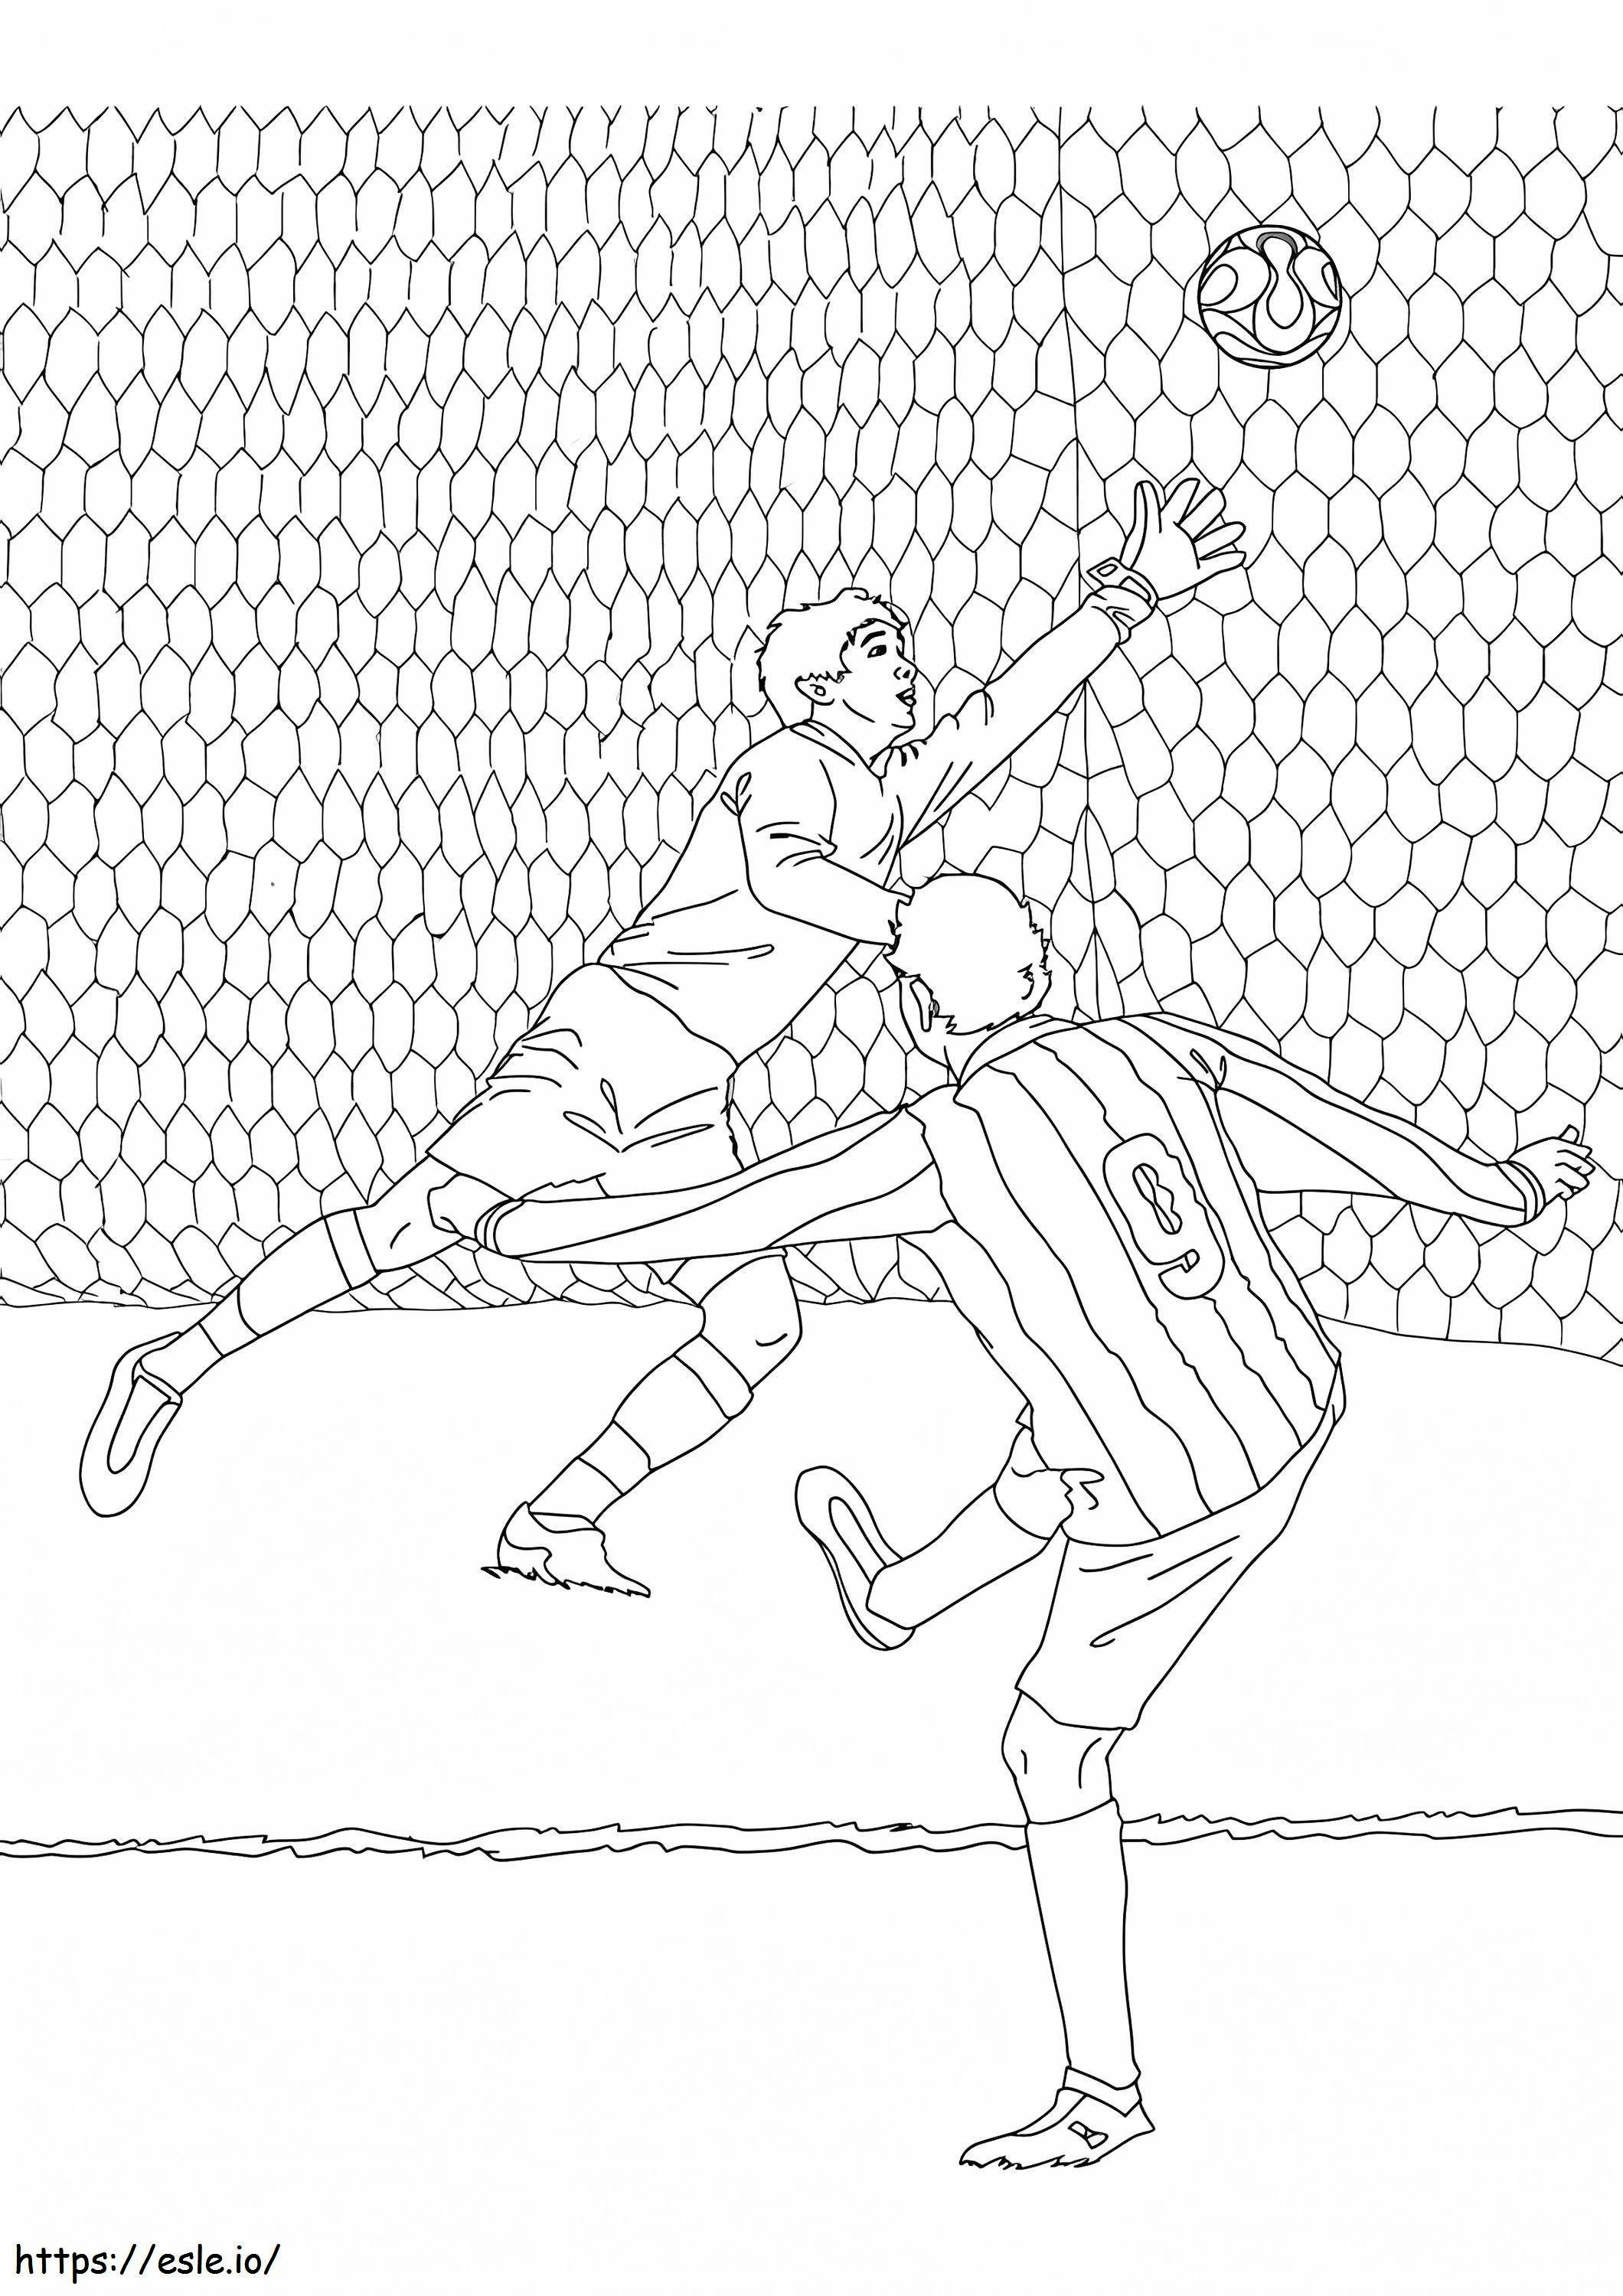 1528272638_The Scoring A Goal Color To Print A4 coloring page